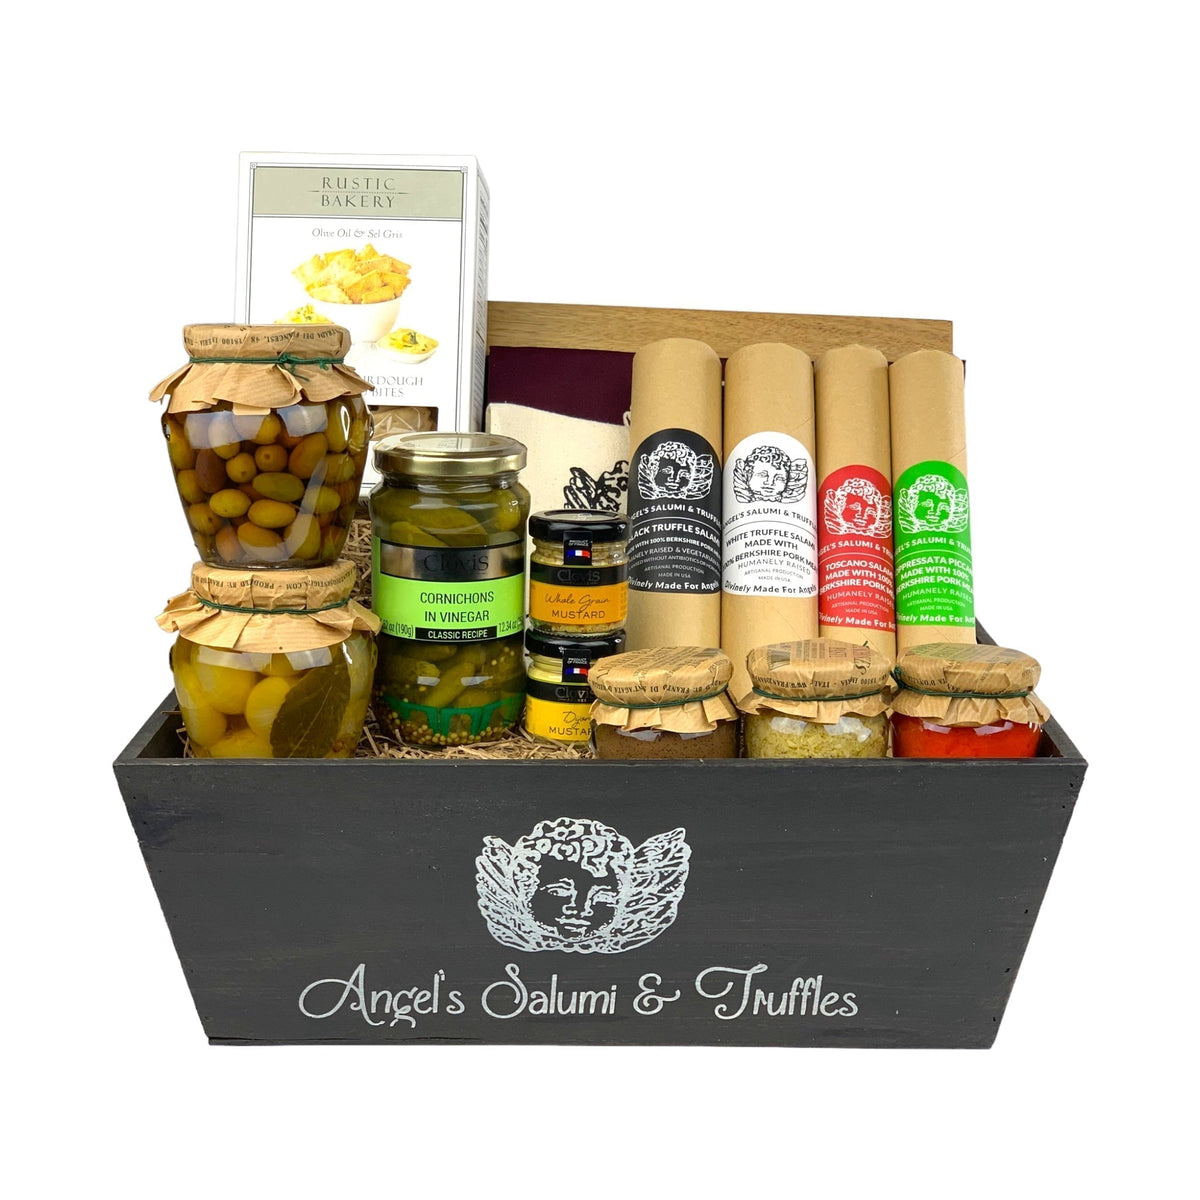  A dark wooden gift box filled with various antipasti and salami